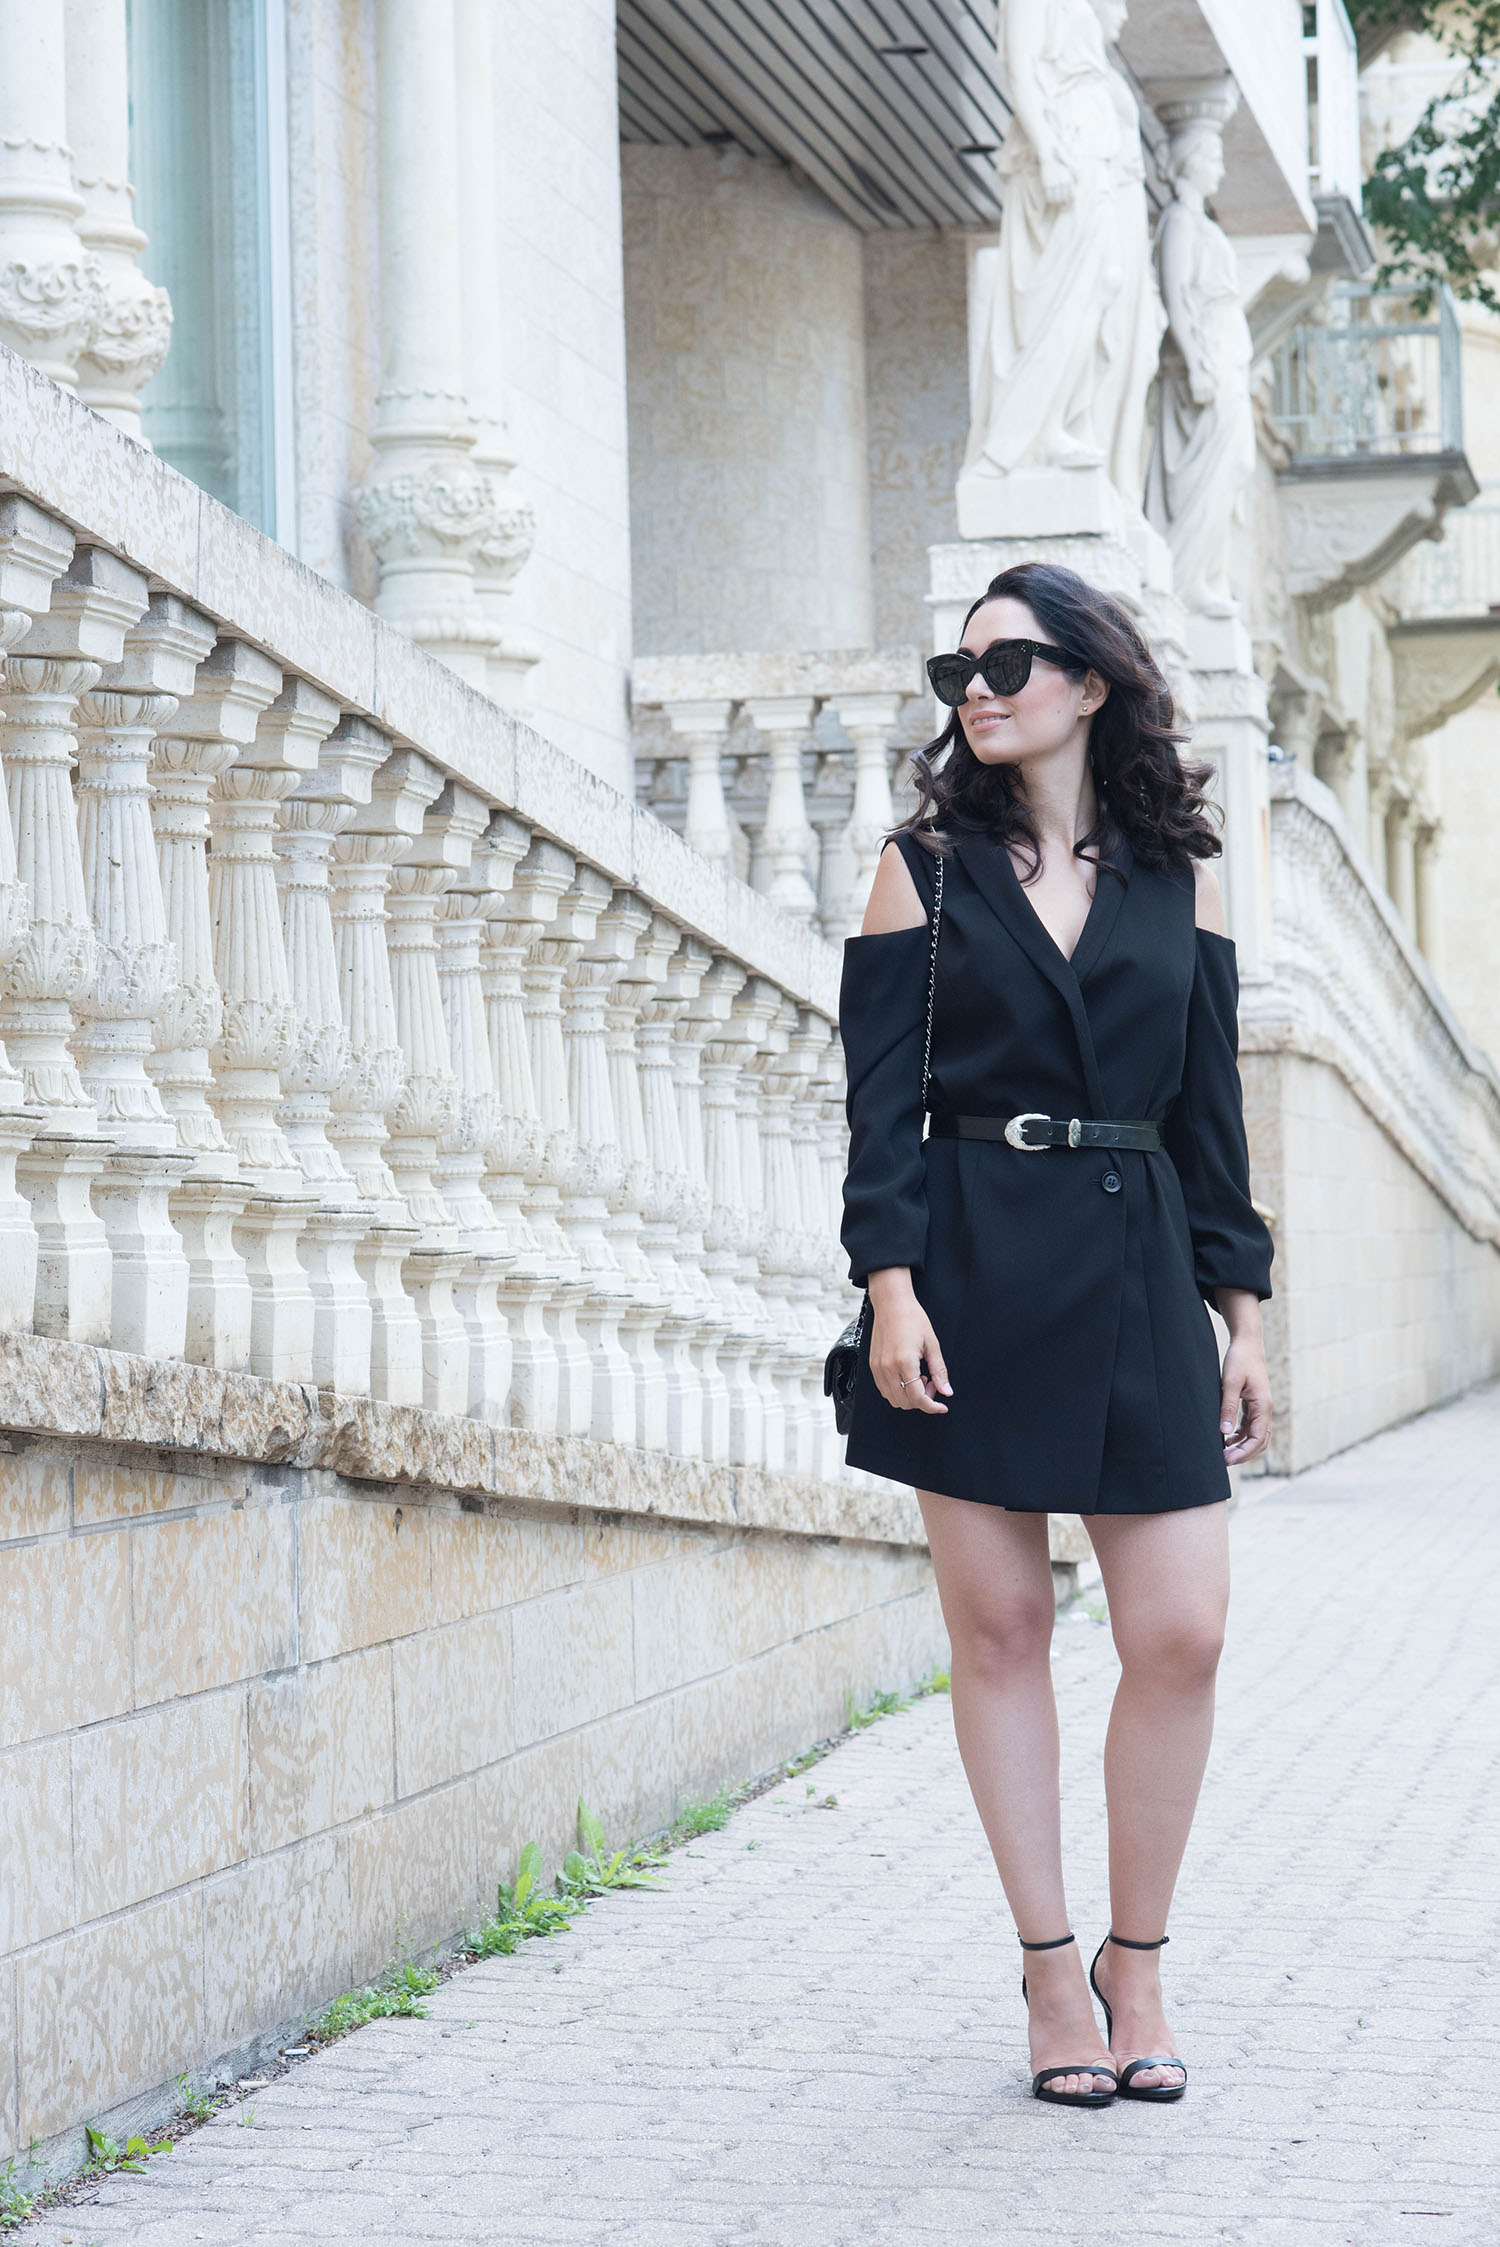 Fashion blogger Cee Fardoe of Coco & Vera wears and Ever New cold shoulder dress, vintage belt and Steve Madden Stecy sandals